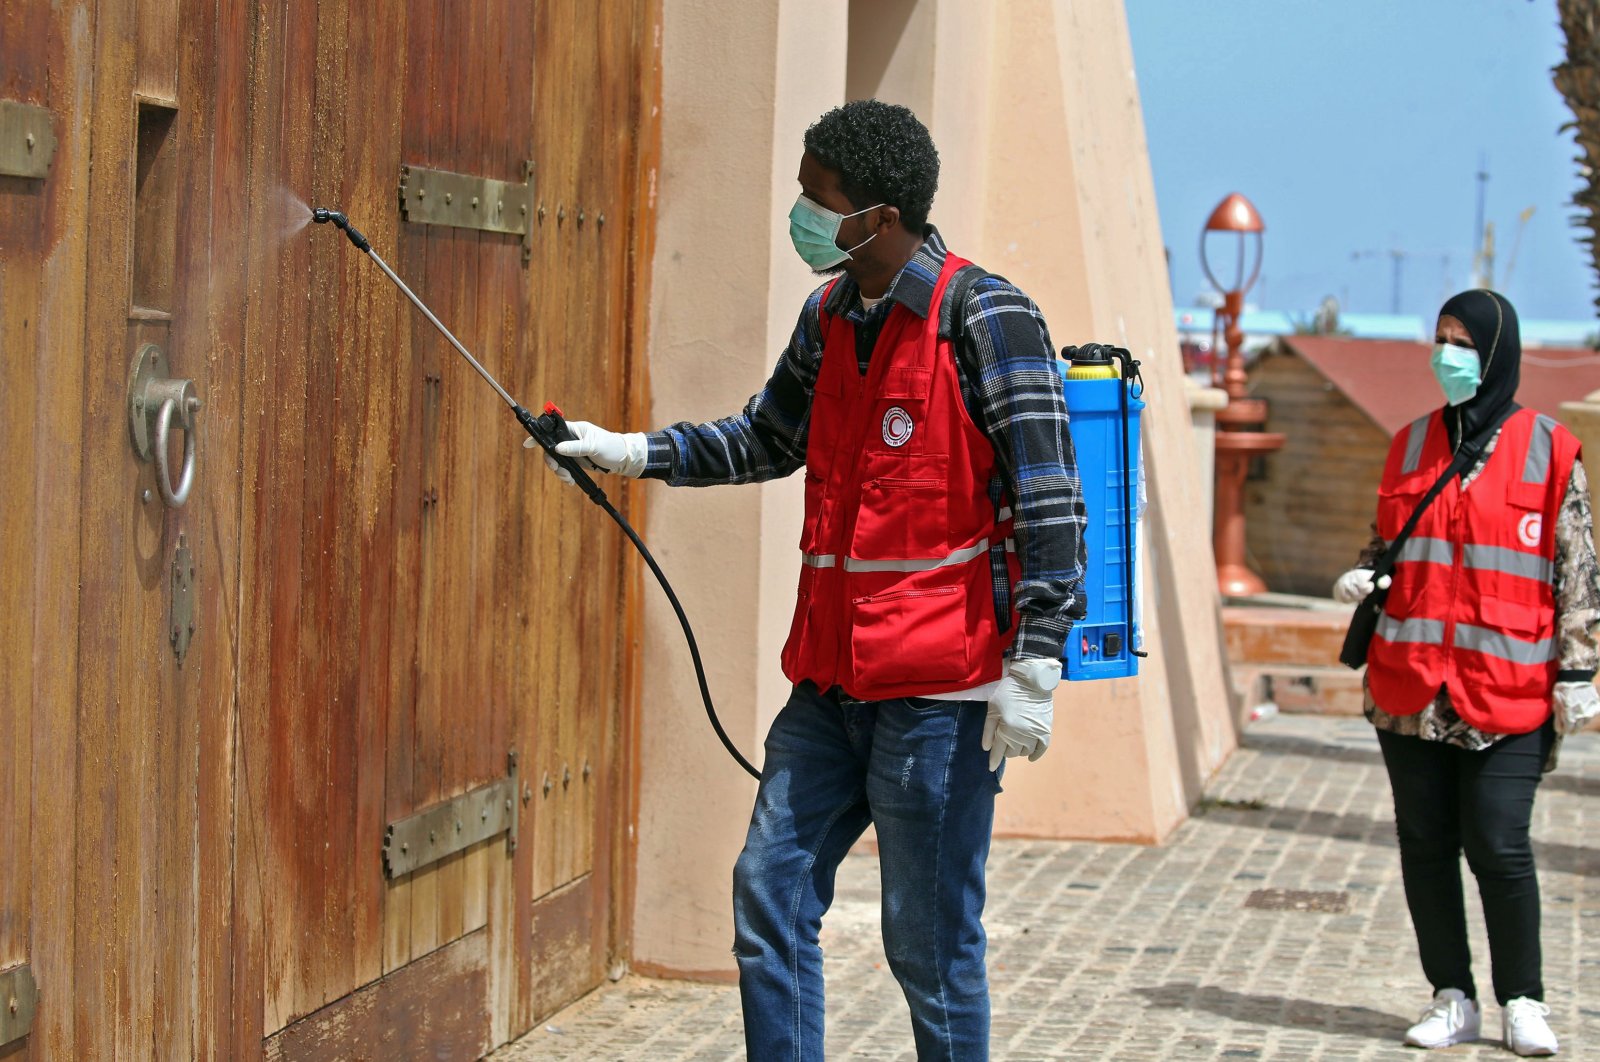 Members of the Libyan Red Crescent disinfect a street in the center of the capital Tripoli as a measure to stem the spread of the coronavirus, Wednesday, April 1, 2020. (AFP Photo)